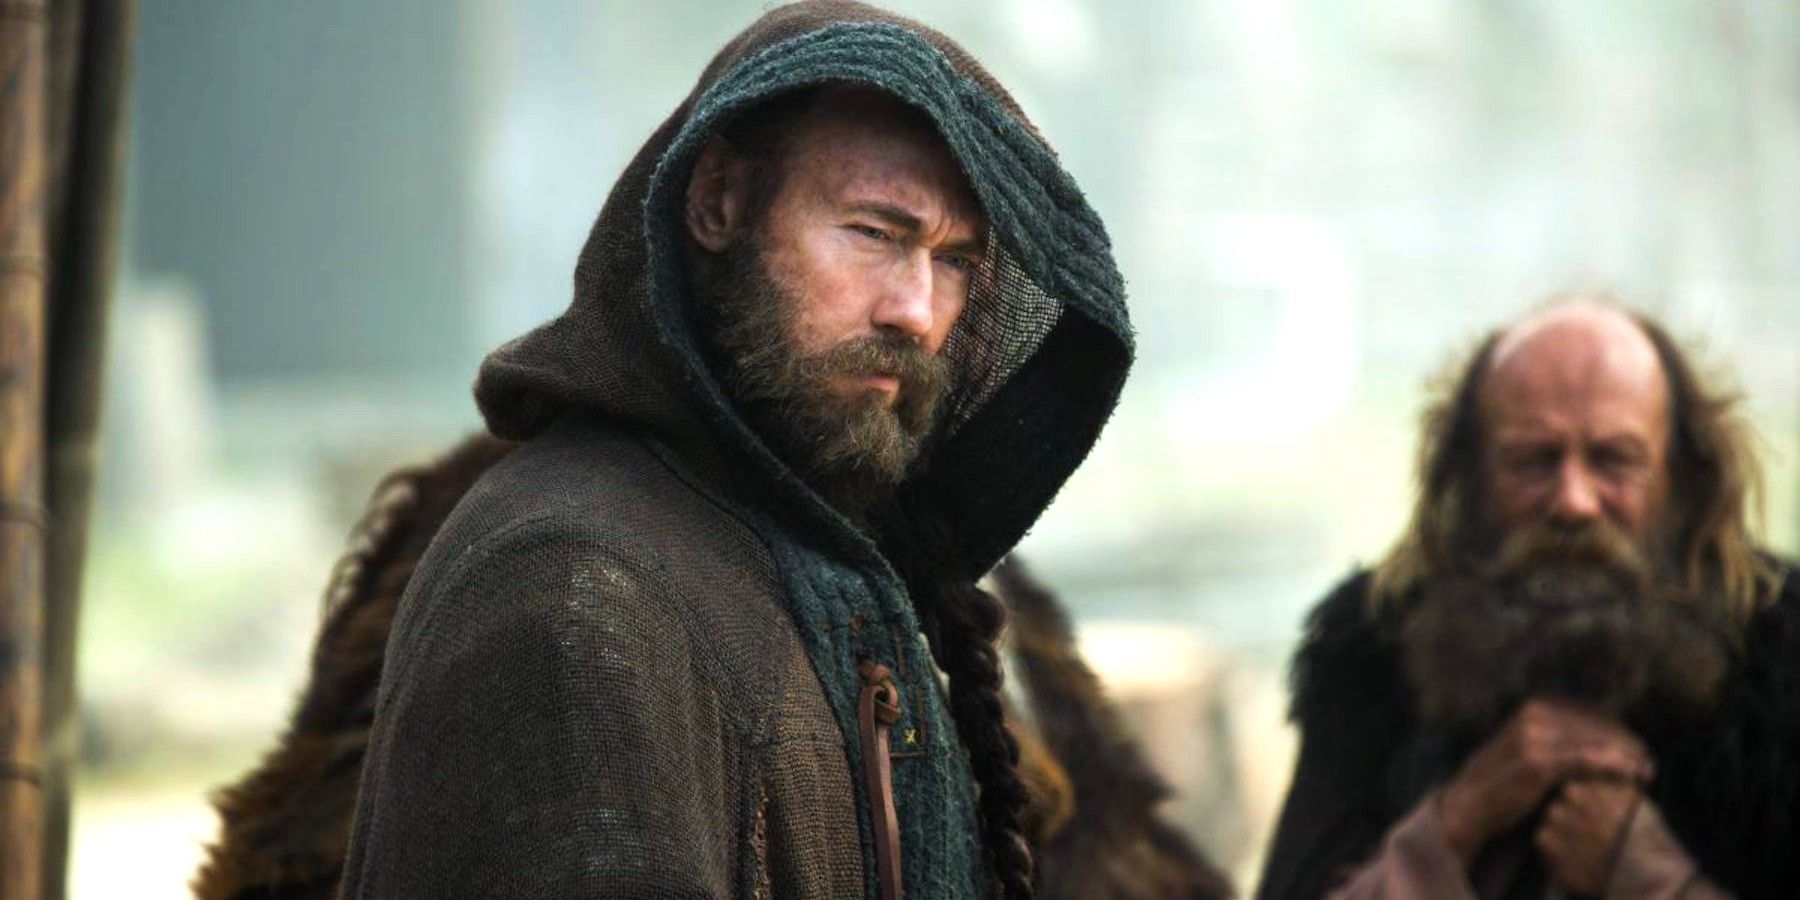 Kevin Durand as Harbard looking intensely while wearing a hood on Vikings season 4